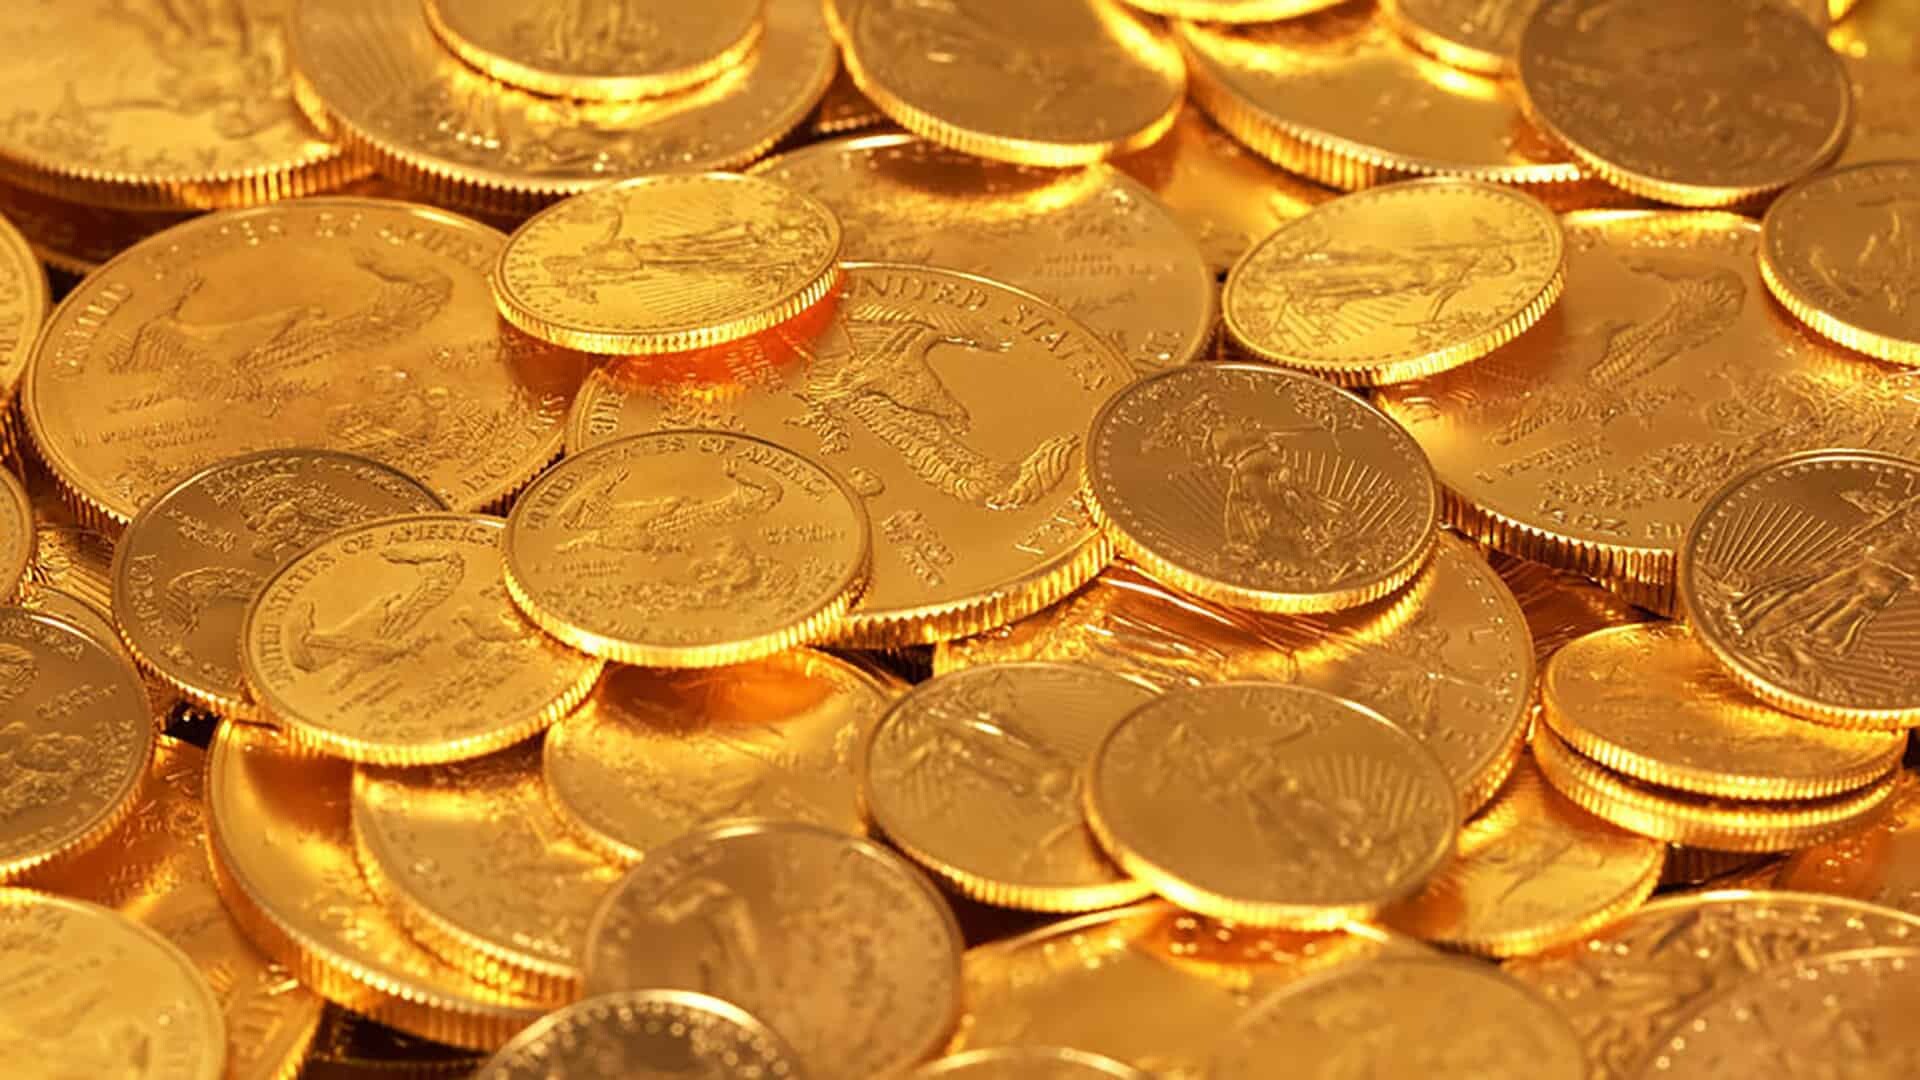 Writing with Gold Coins, Memoir inspiration, Literary symbolism, Writing prompts, 1920x1080 Full HD Desktop